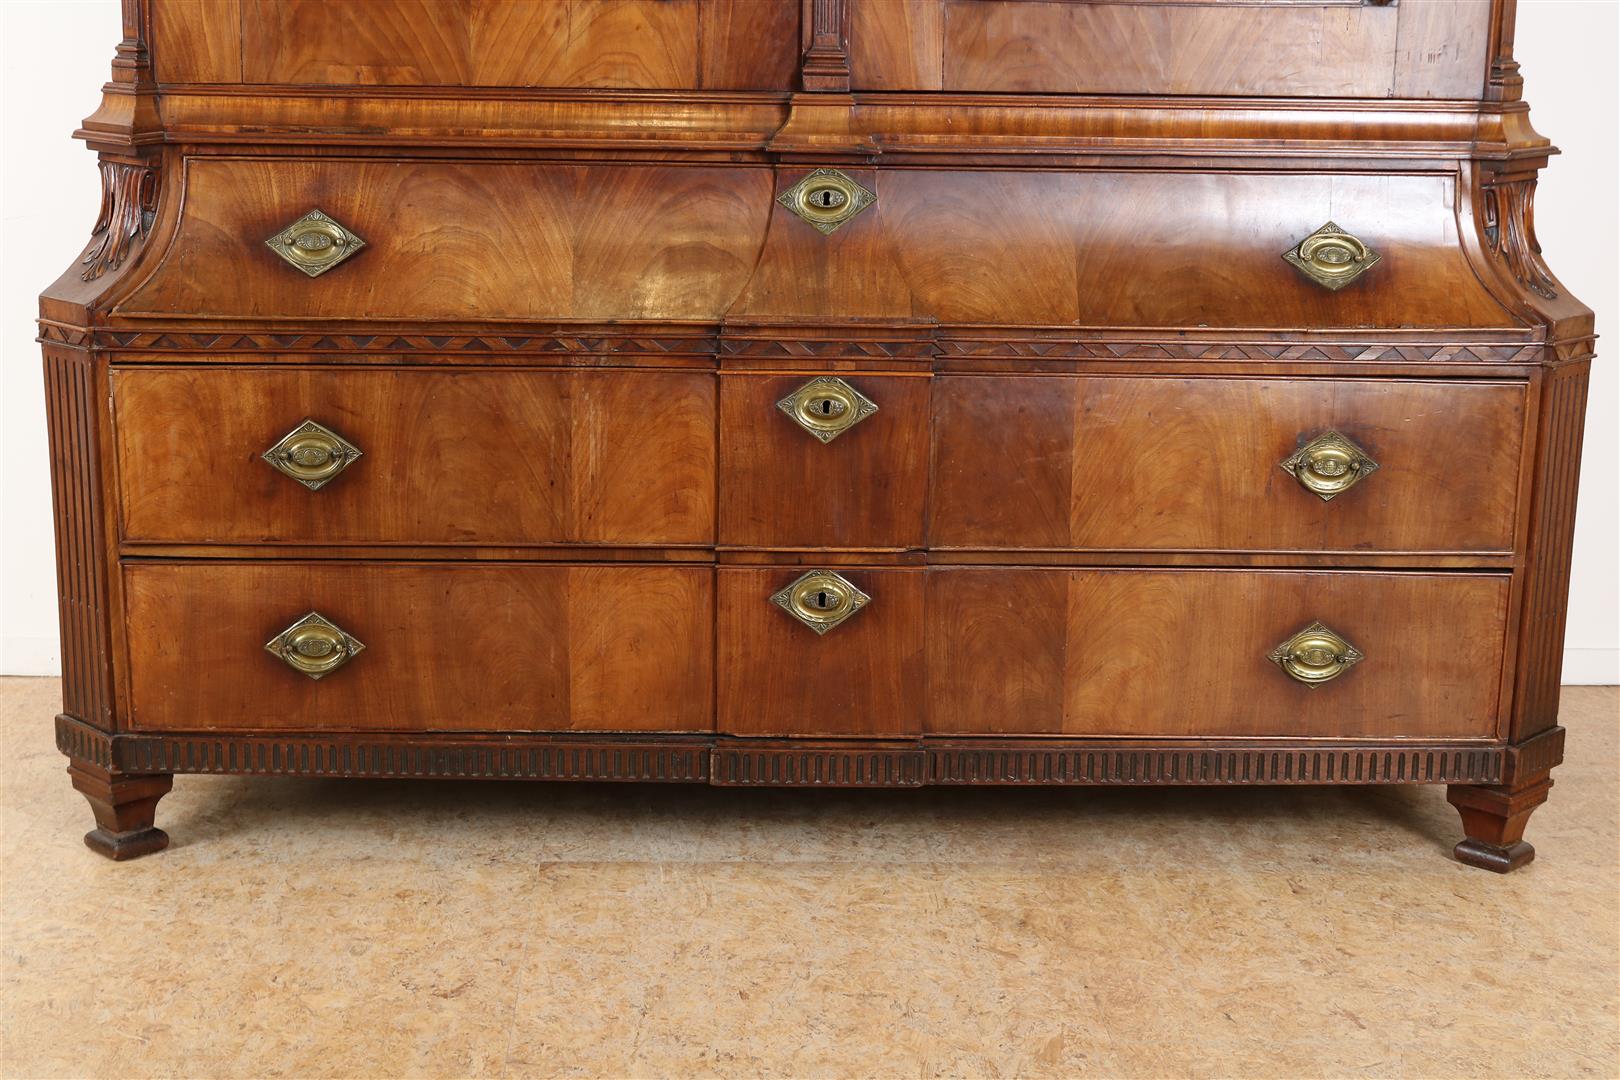 Mahogany Louis XVI breakfront cabinet with carved garlands in crest, 2 panel doors and 3 drawers, - Image 4 of 7